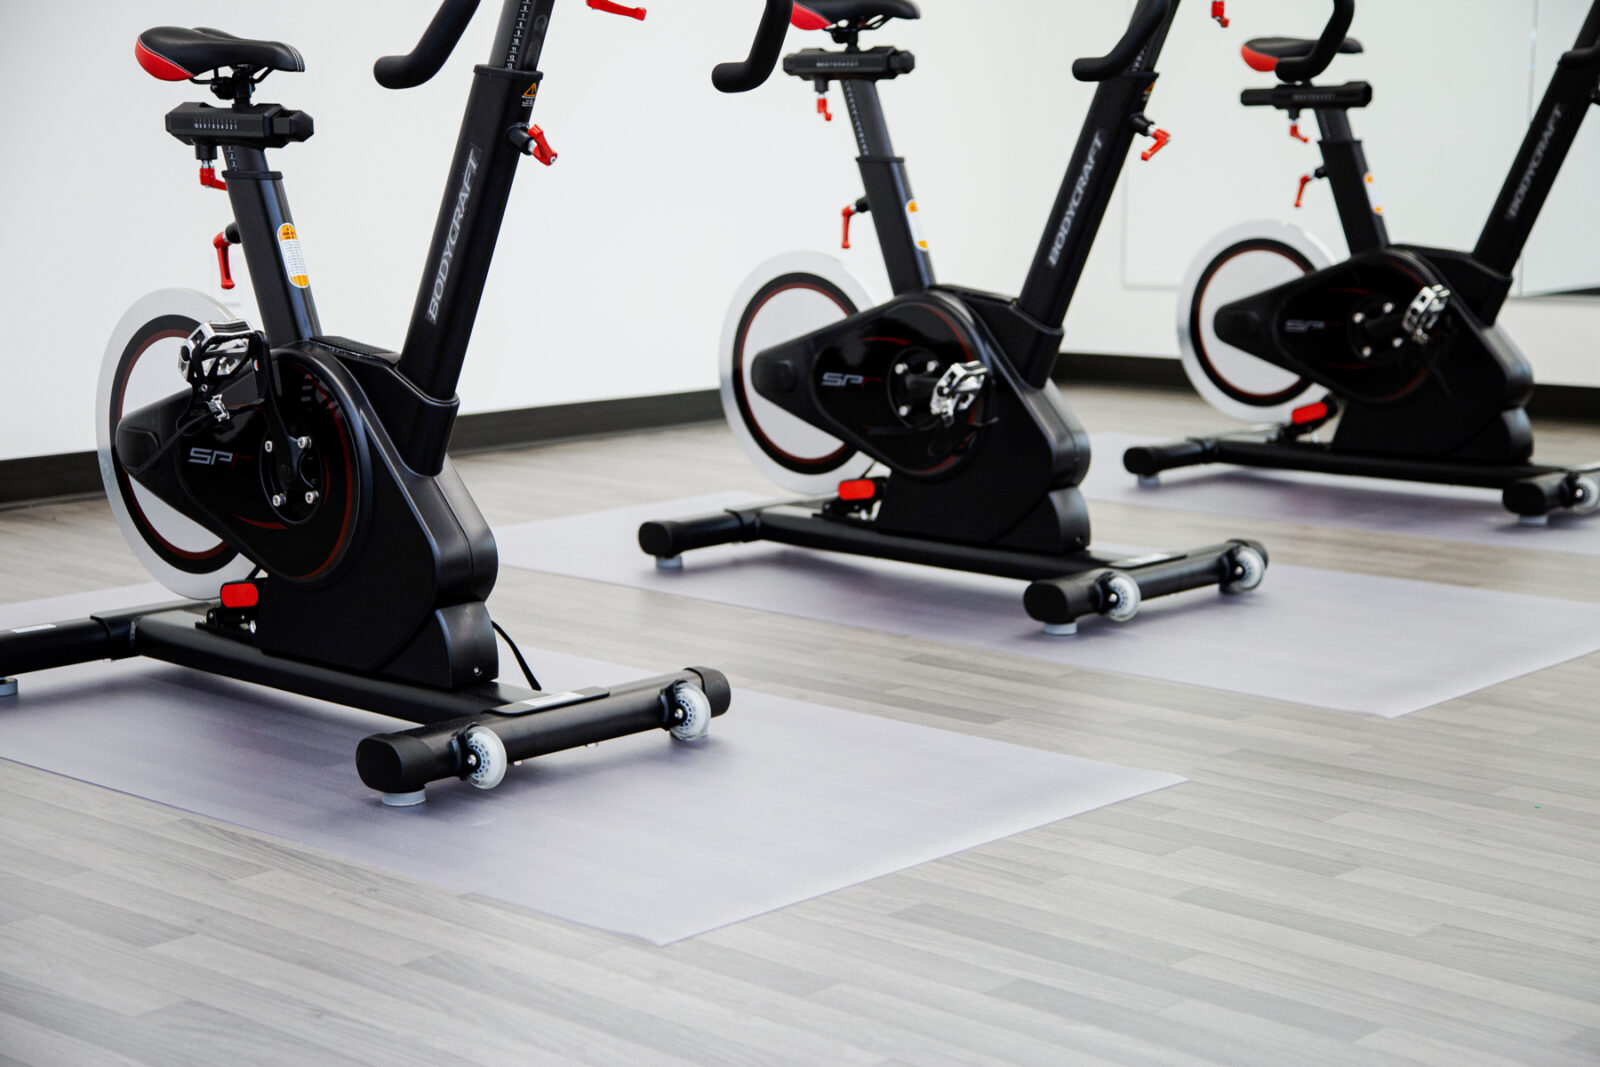 three exercise bikes on clear floor protector mats